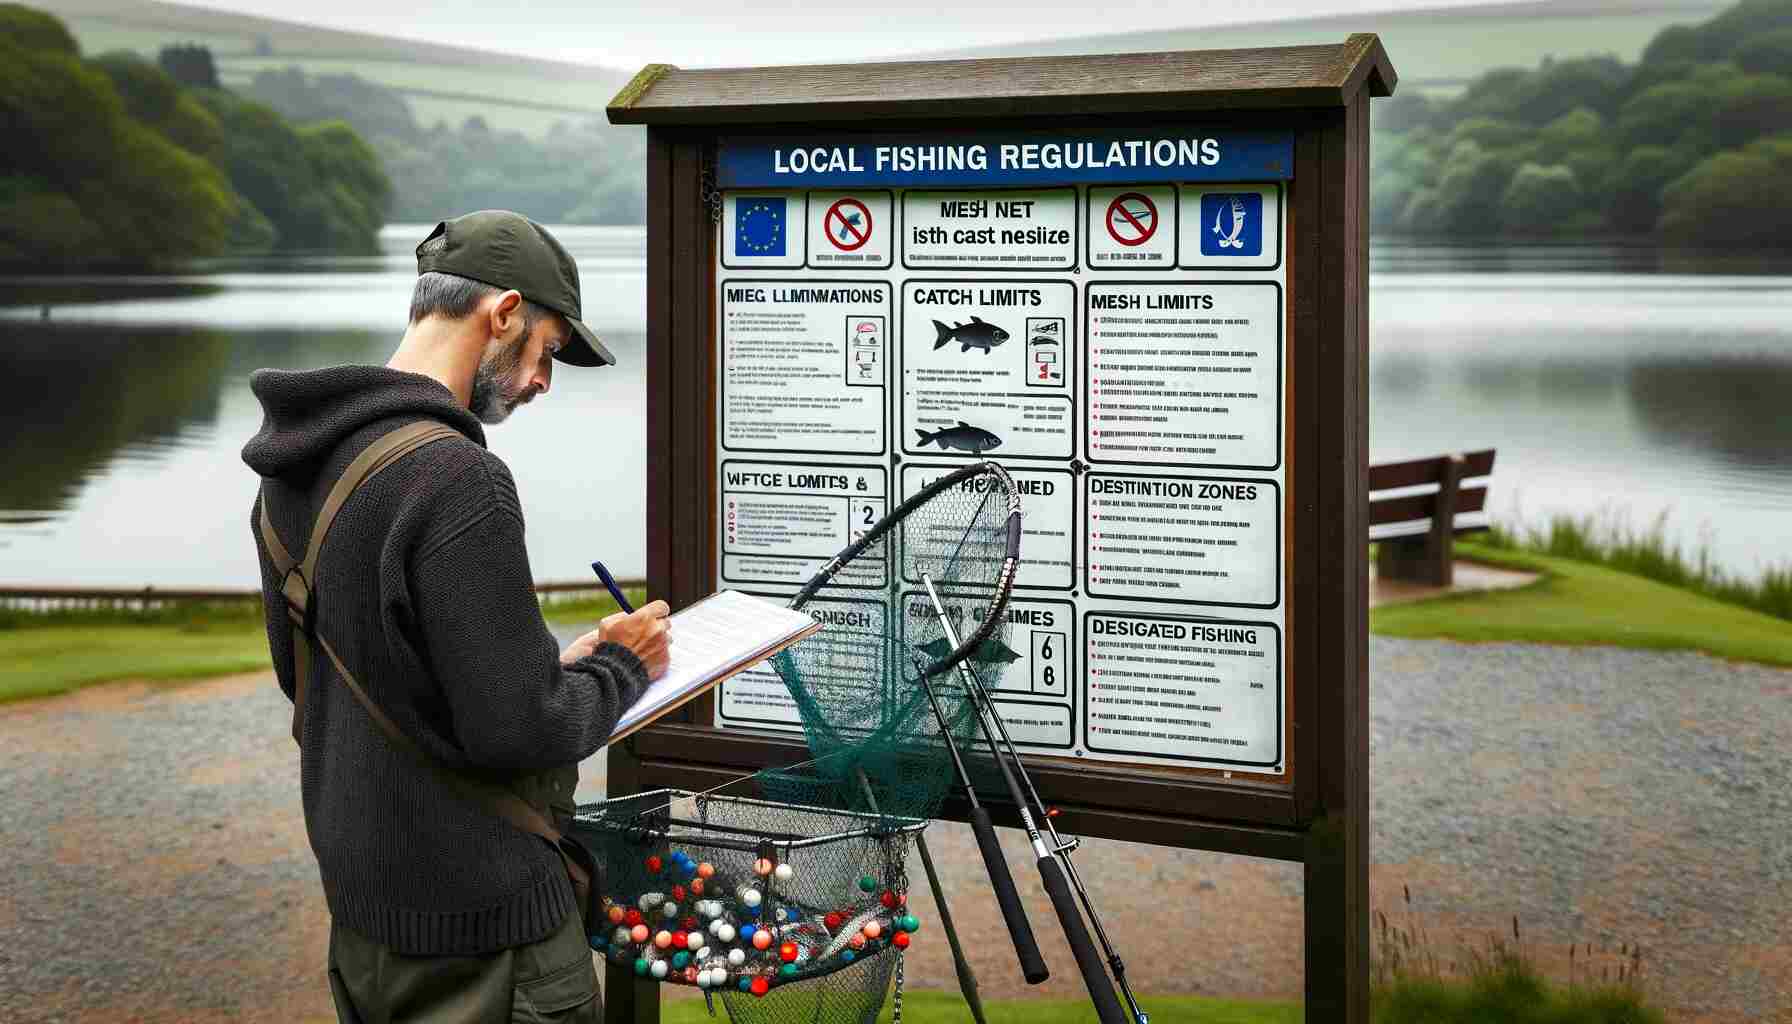 An angler reviewing local fishing regulations and guidelines at a lakeside information board.